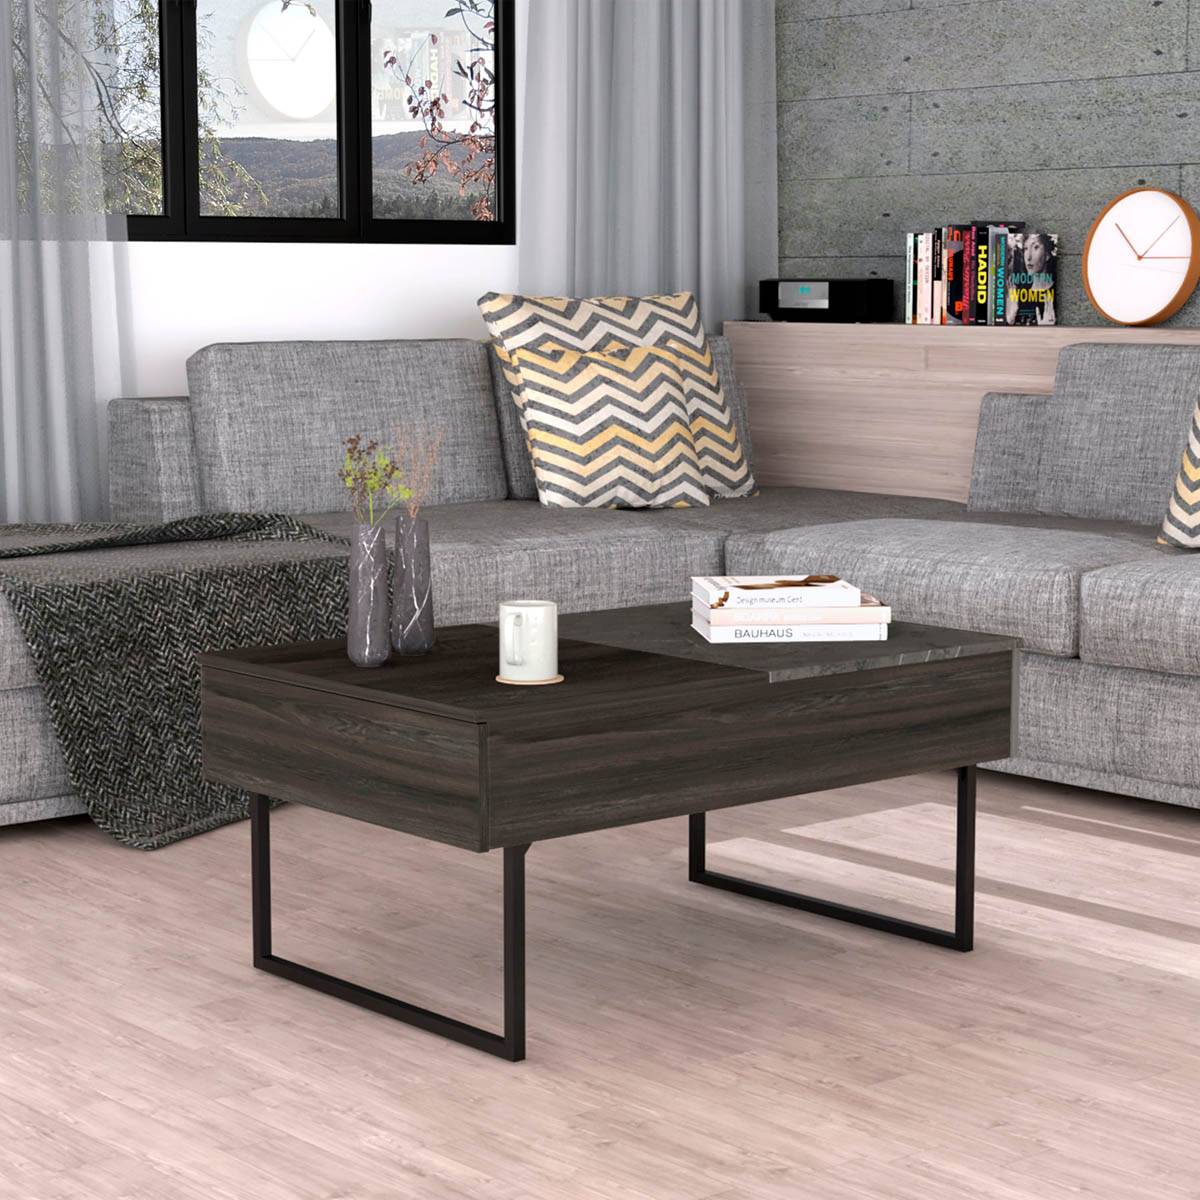 FM FURNITURE Georgetown Lift Onyx Top Coffee Table